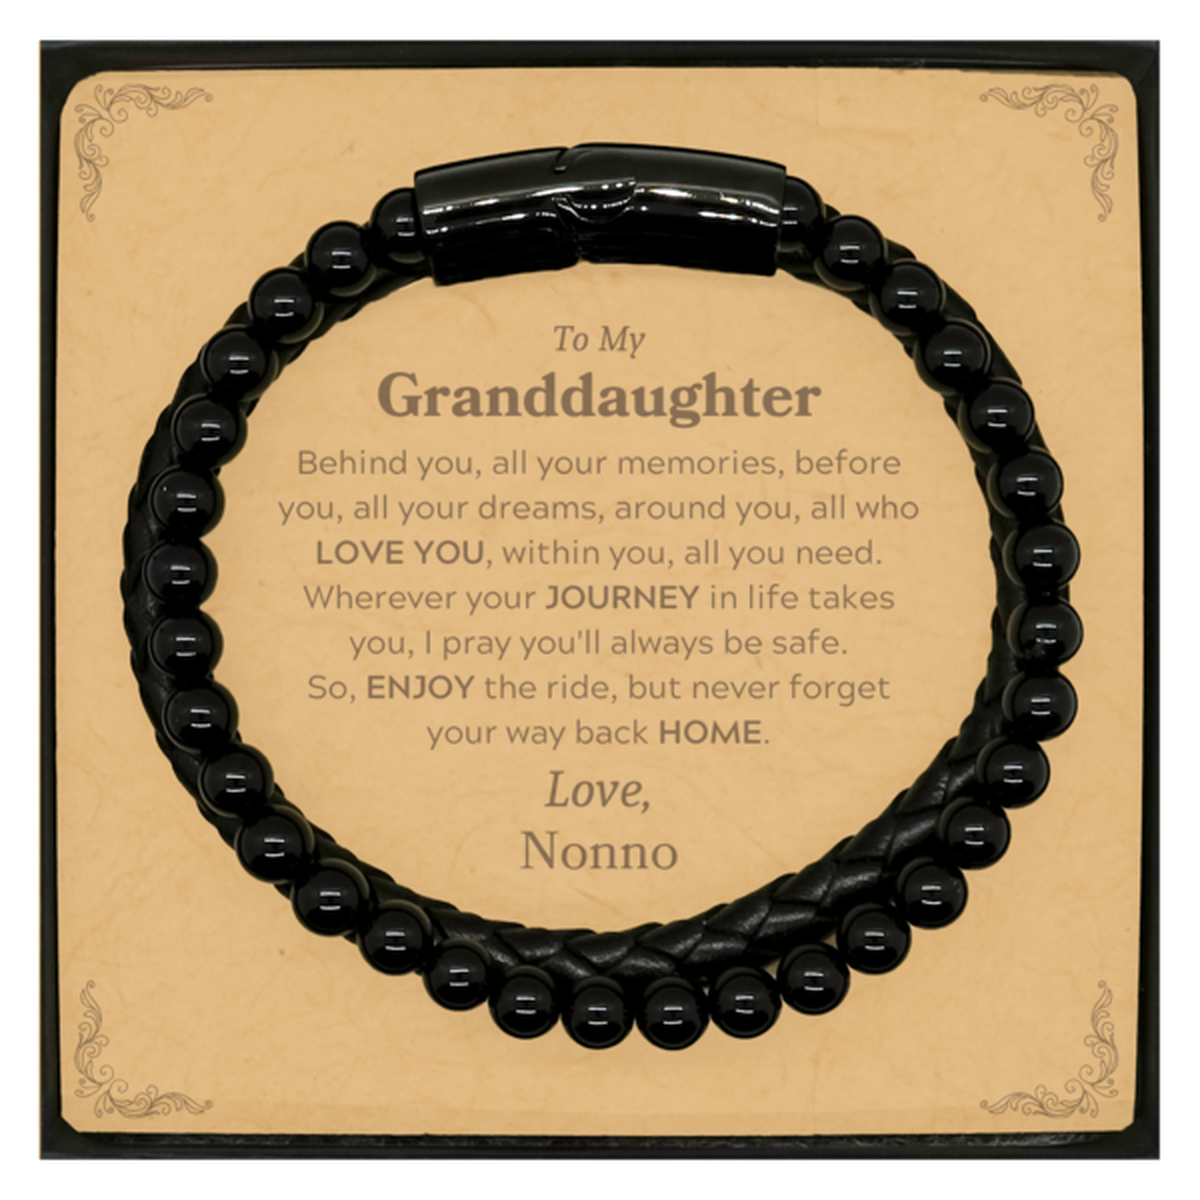 To My Granddaughter Graduation Gifts from Nonno, Granddaughter Stone Leather Bracelets Christmas Birthday Gifts for Granddaughter Behind you, all your memories, before you, all your dreams. Love, Nonno